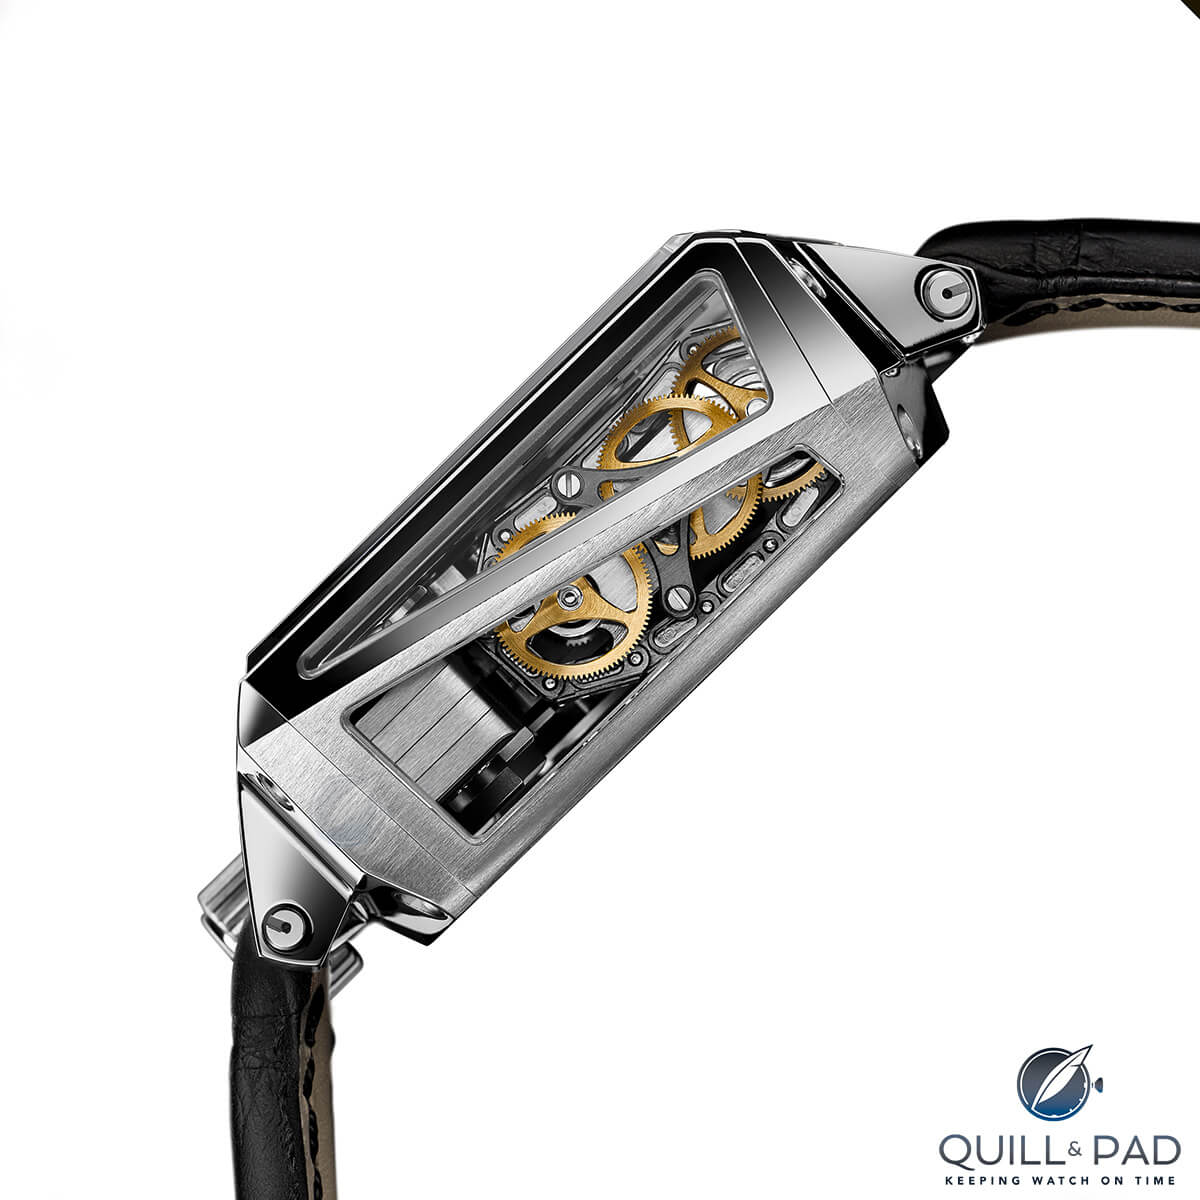 The sapphire crystal panels on the side of the Hautlence Vortex enable full appreciation of the movement inside; the angle cross piece helps to visually break the height of the case